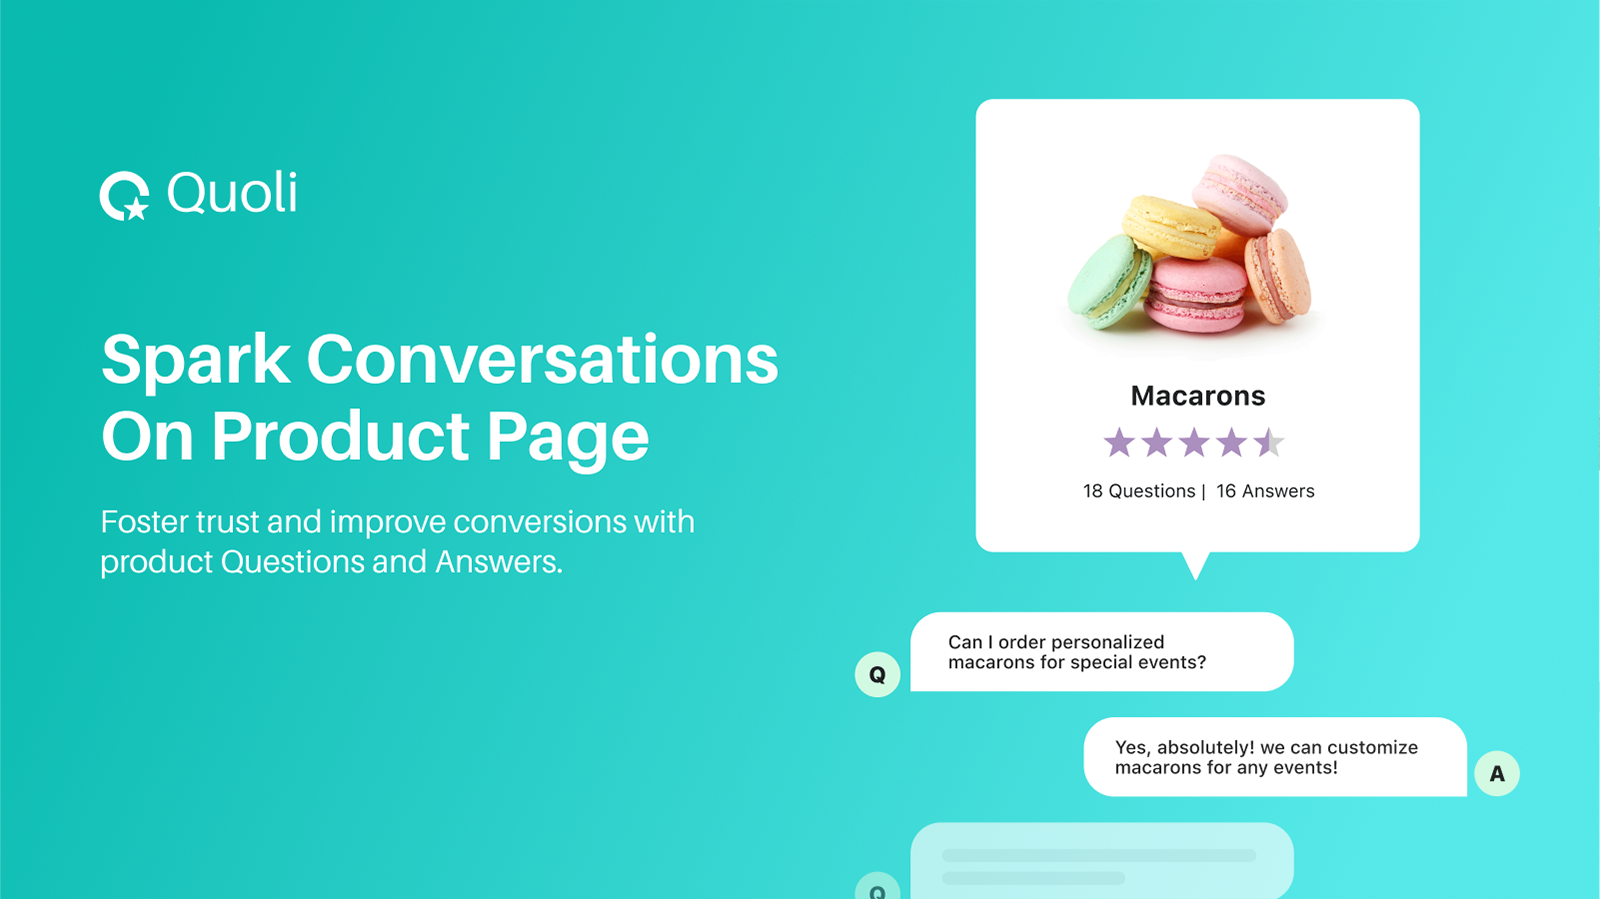 Product questions and answers